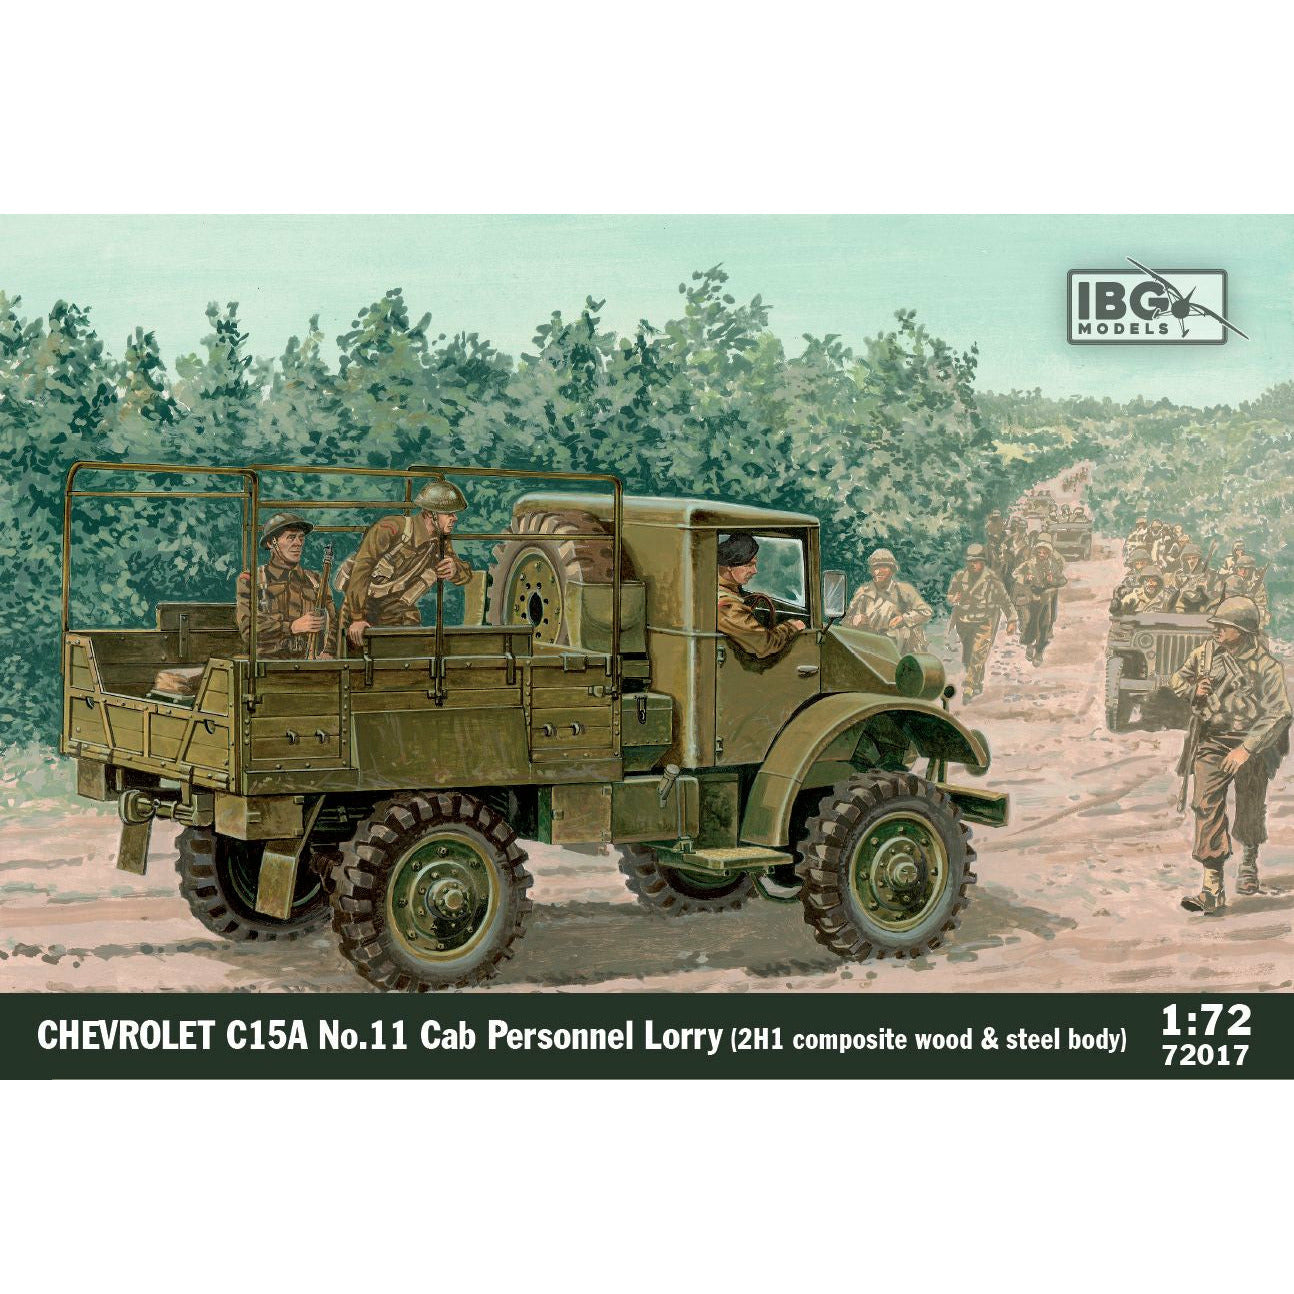 Chevrolet C.15A No.11 Cab Personnel Lorry 1/72 #72017 by IBG Models